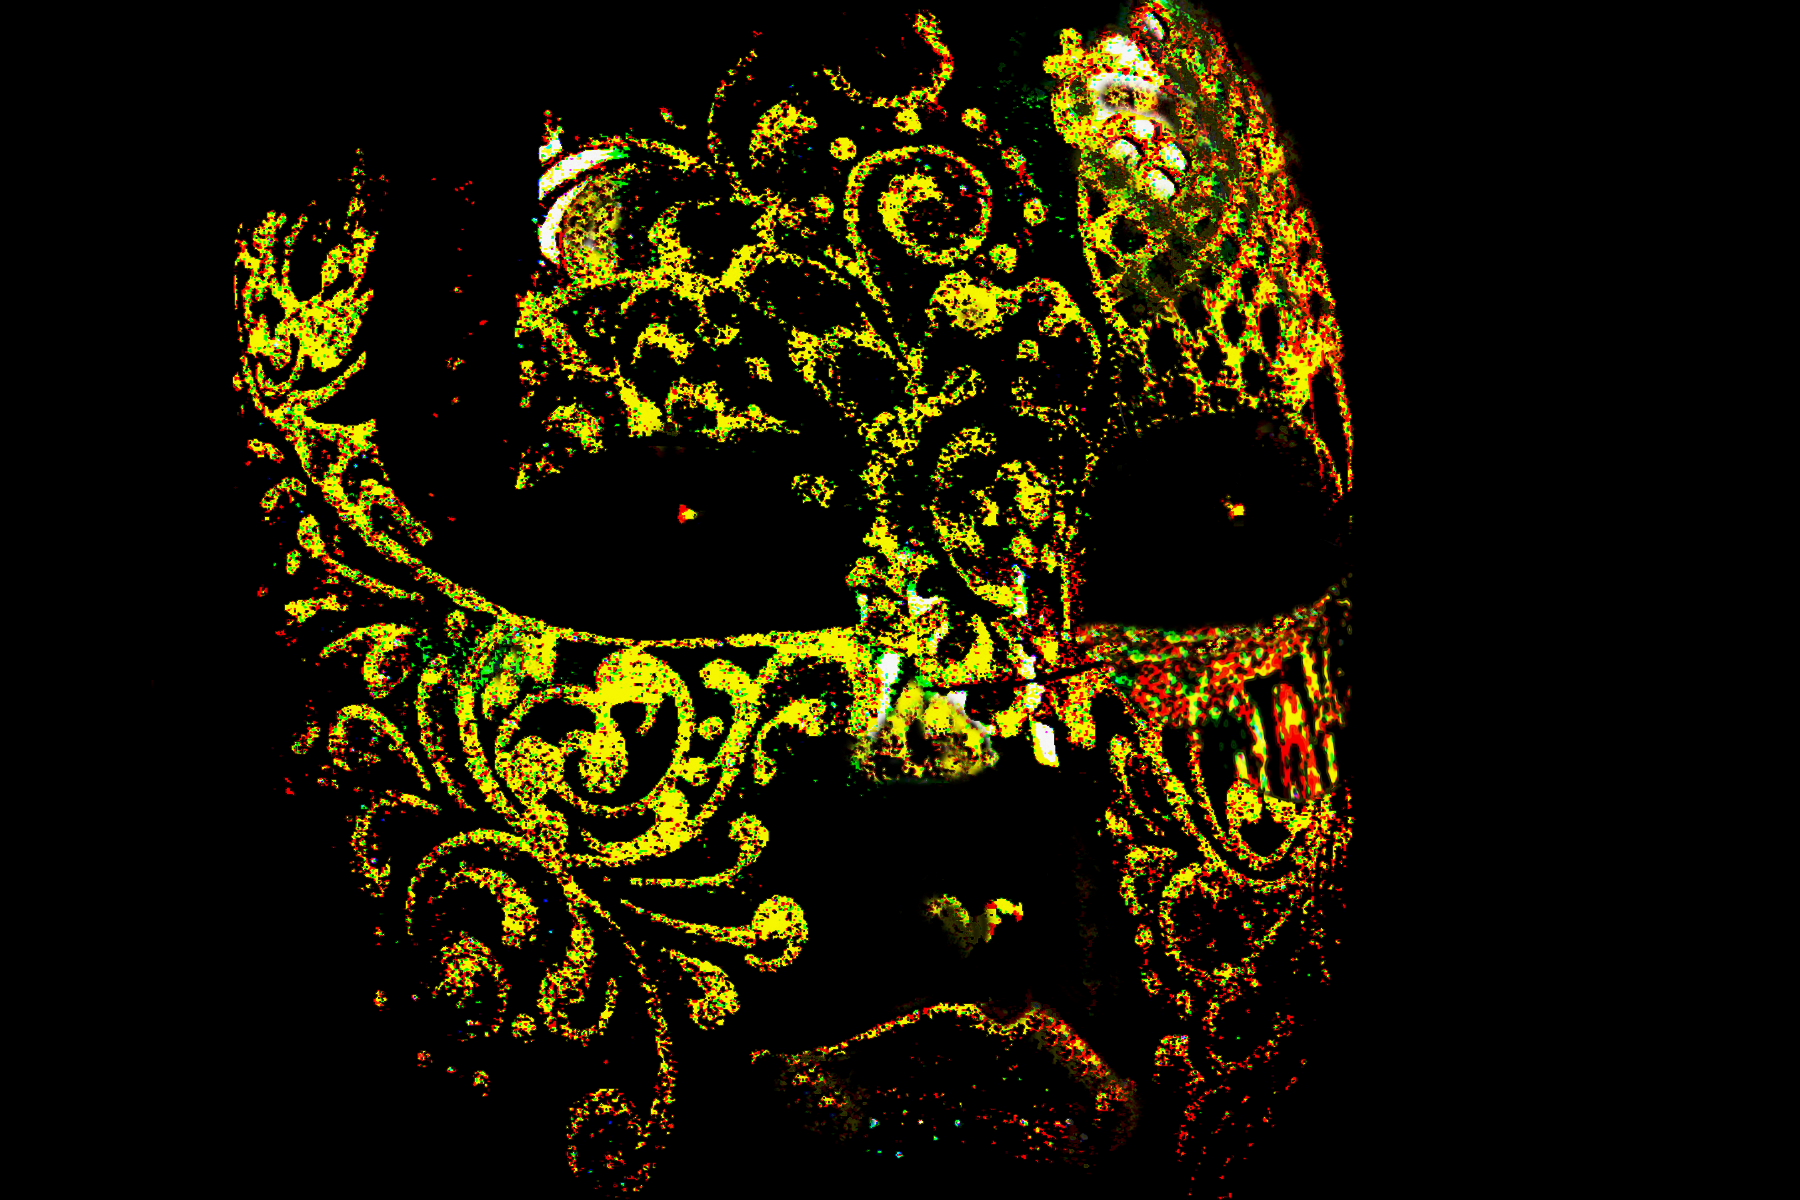 The mask...